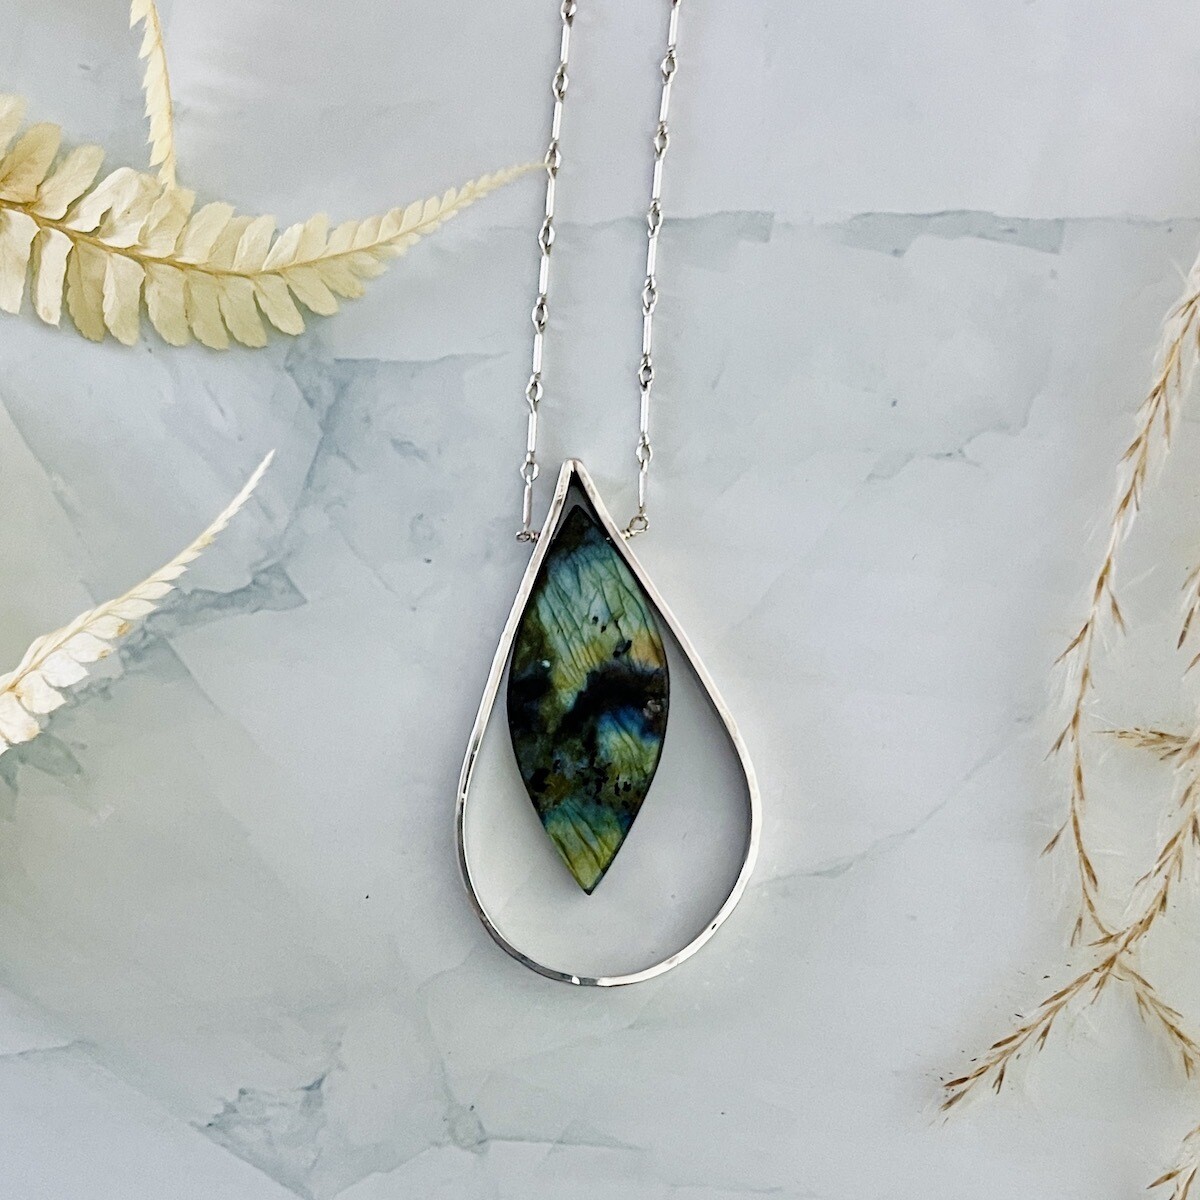 Handmade Necklace with marquise labradorite, wide hammered silver teardrop